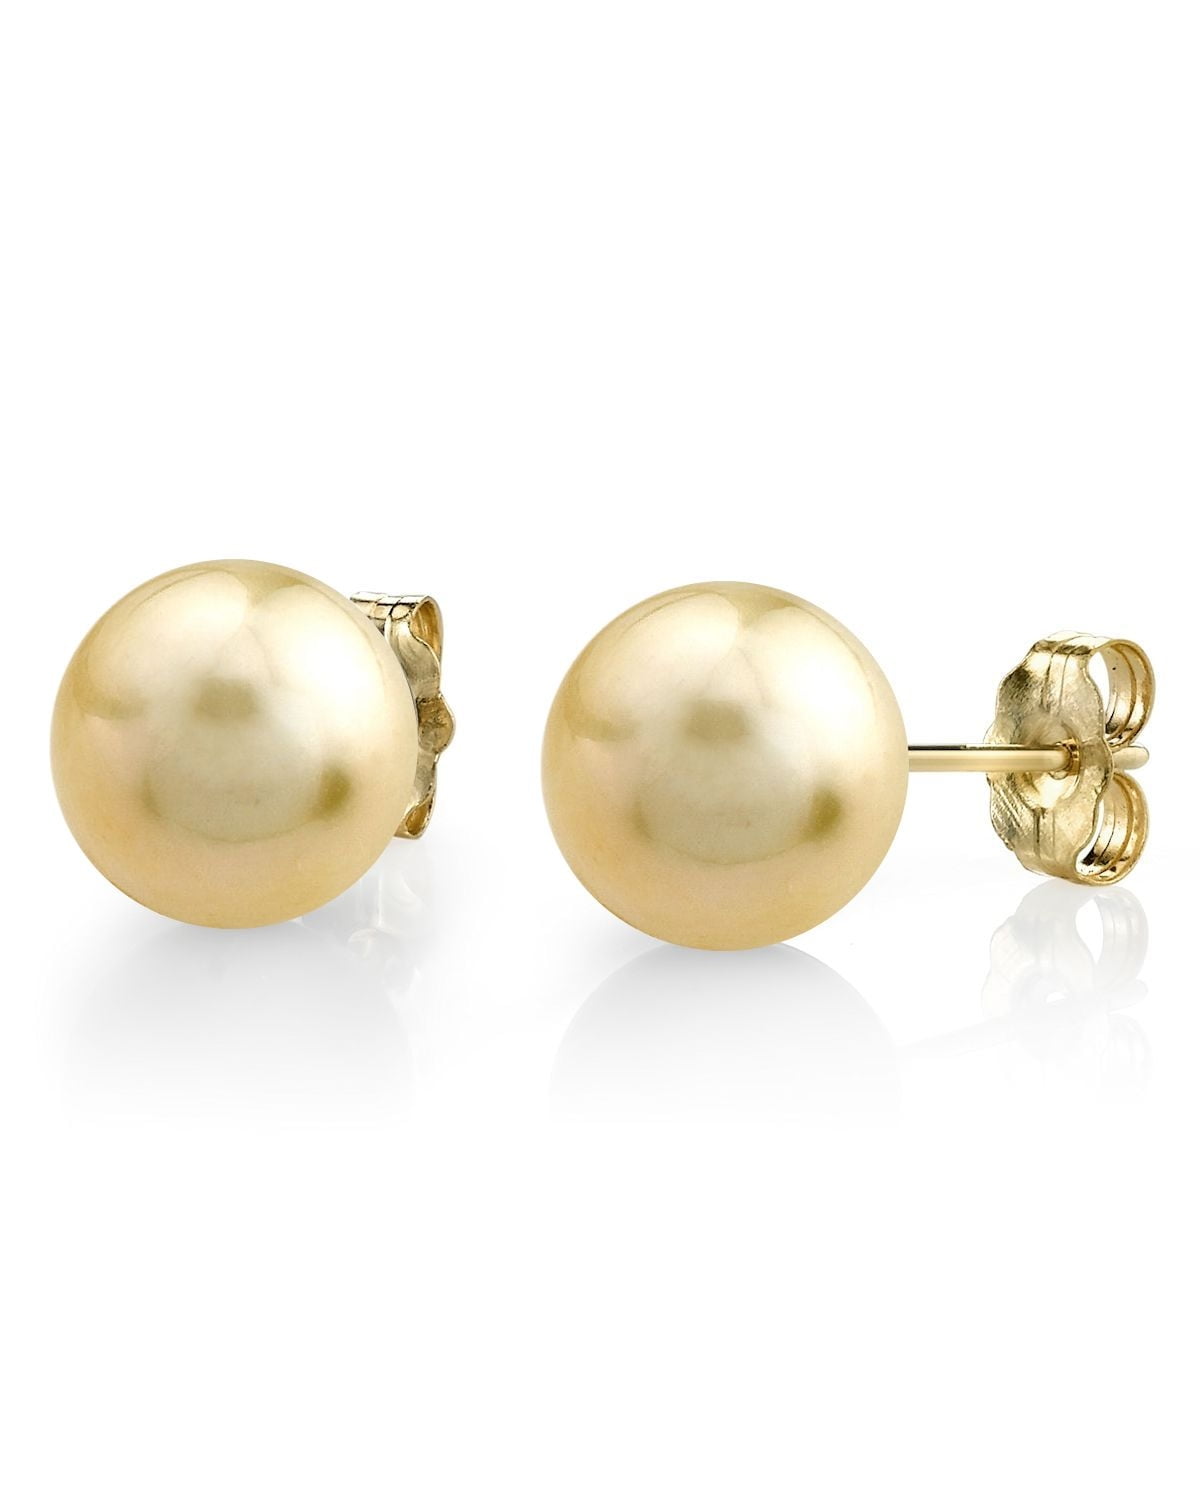 8mm Golden South Sea Cultured Pearl Stud Earrings w/ 14K Yellow Gold 